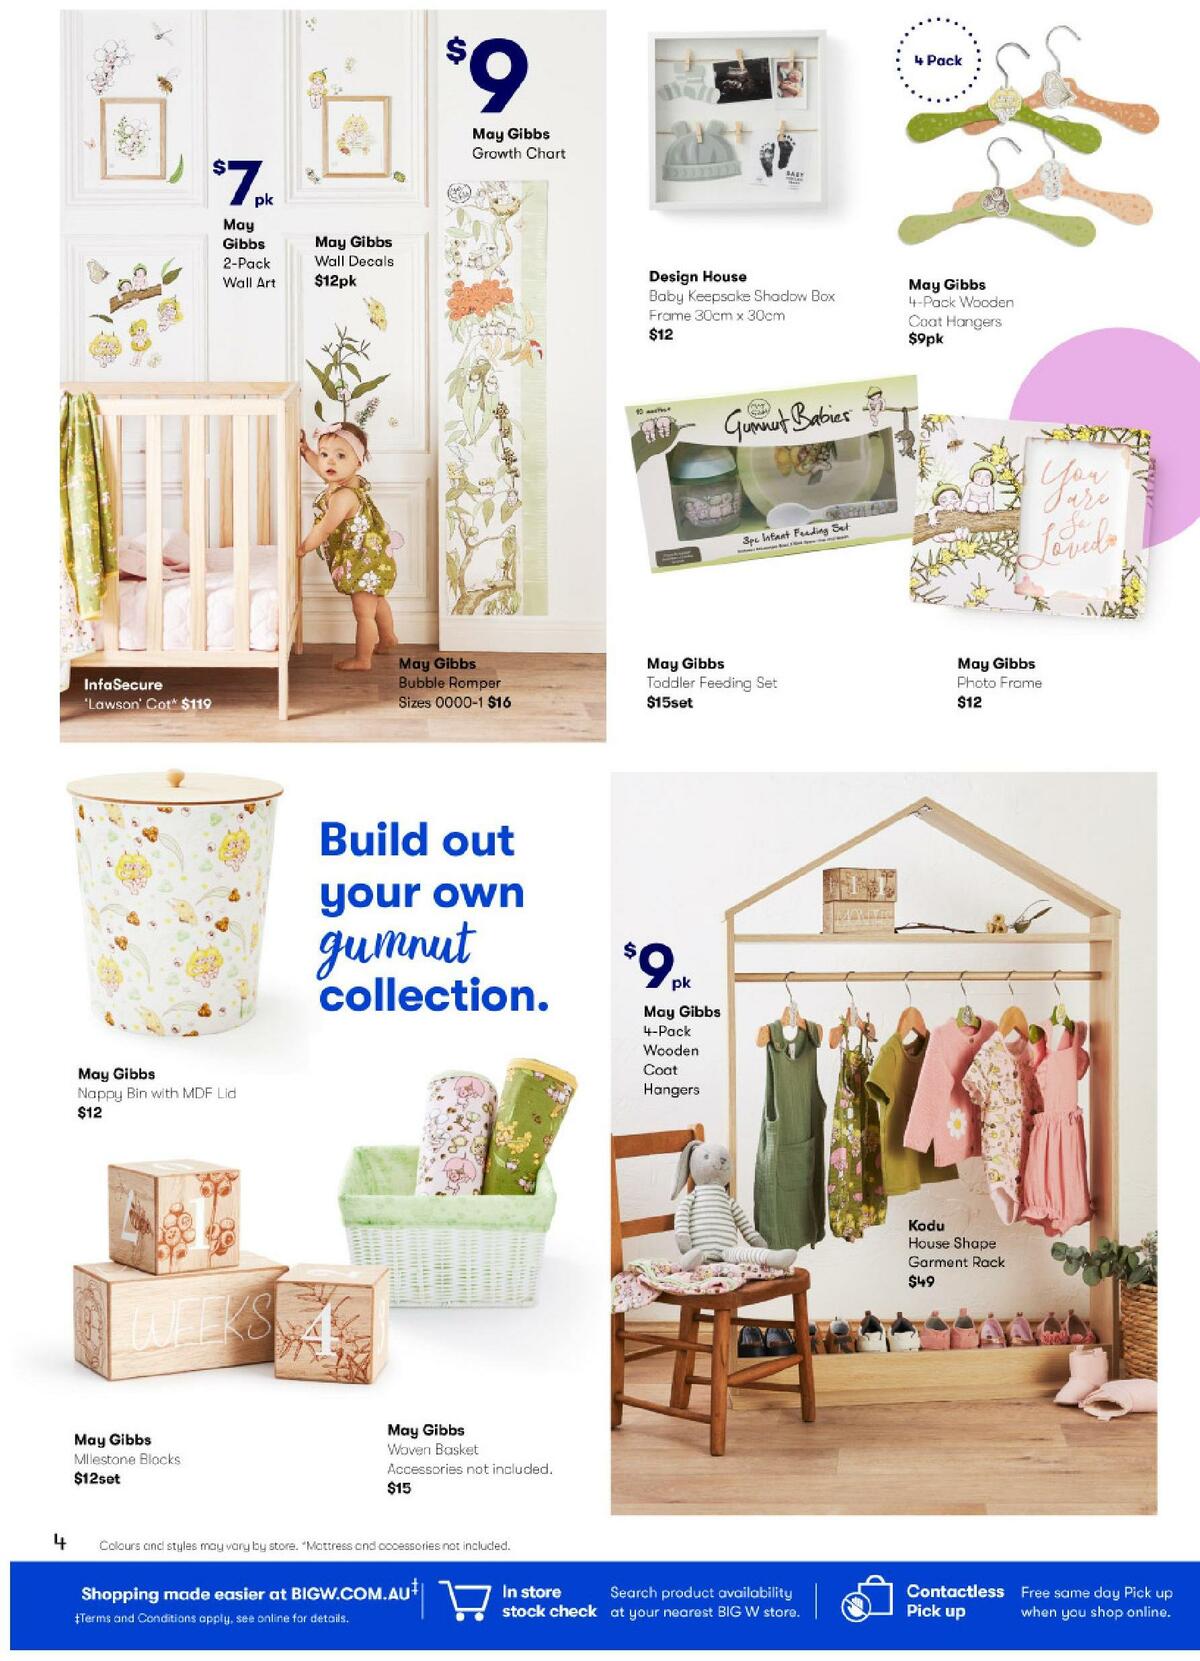 Big W Bub & Me Catalogues from 30 July